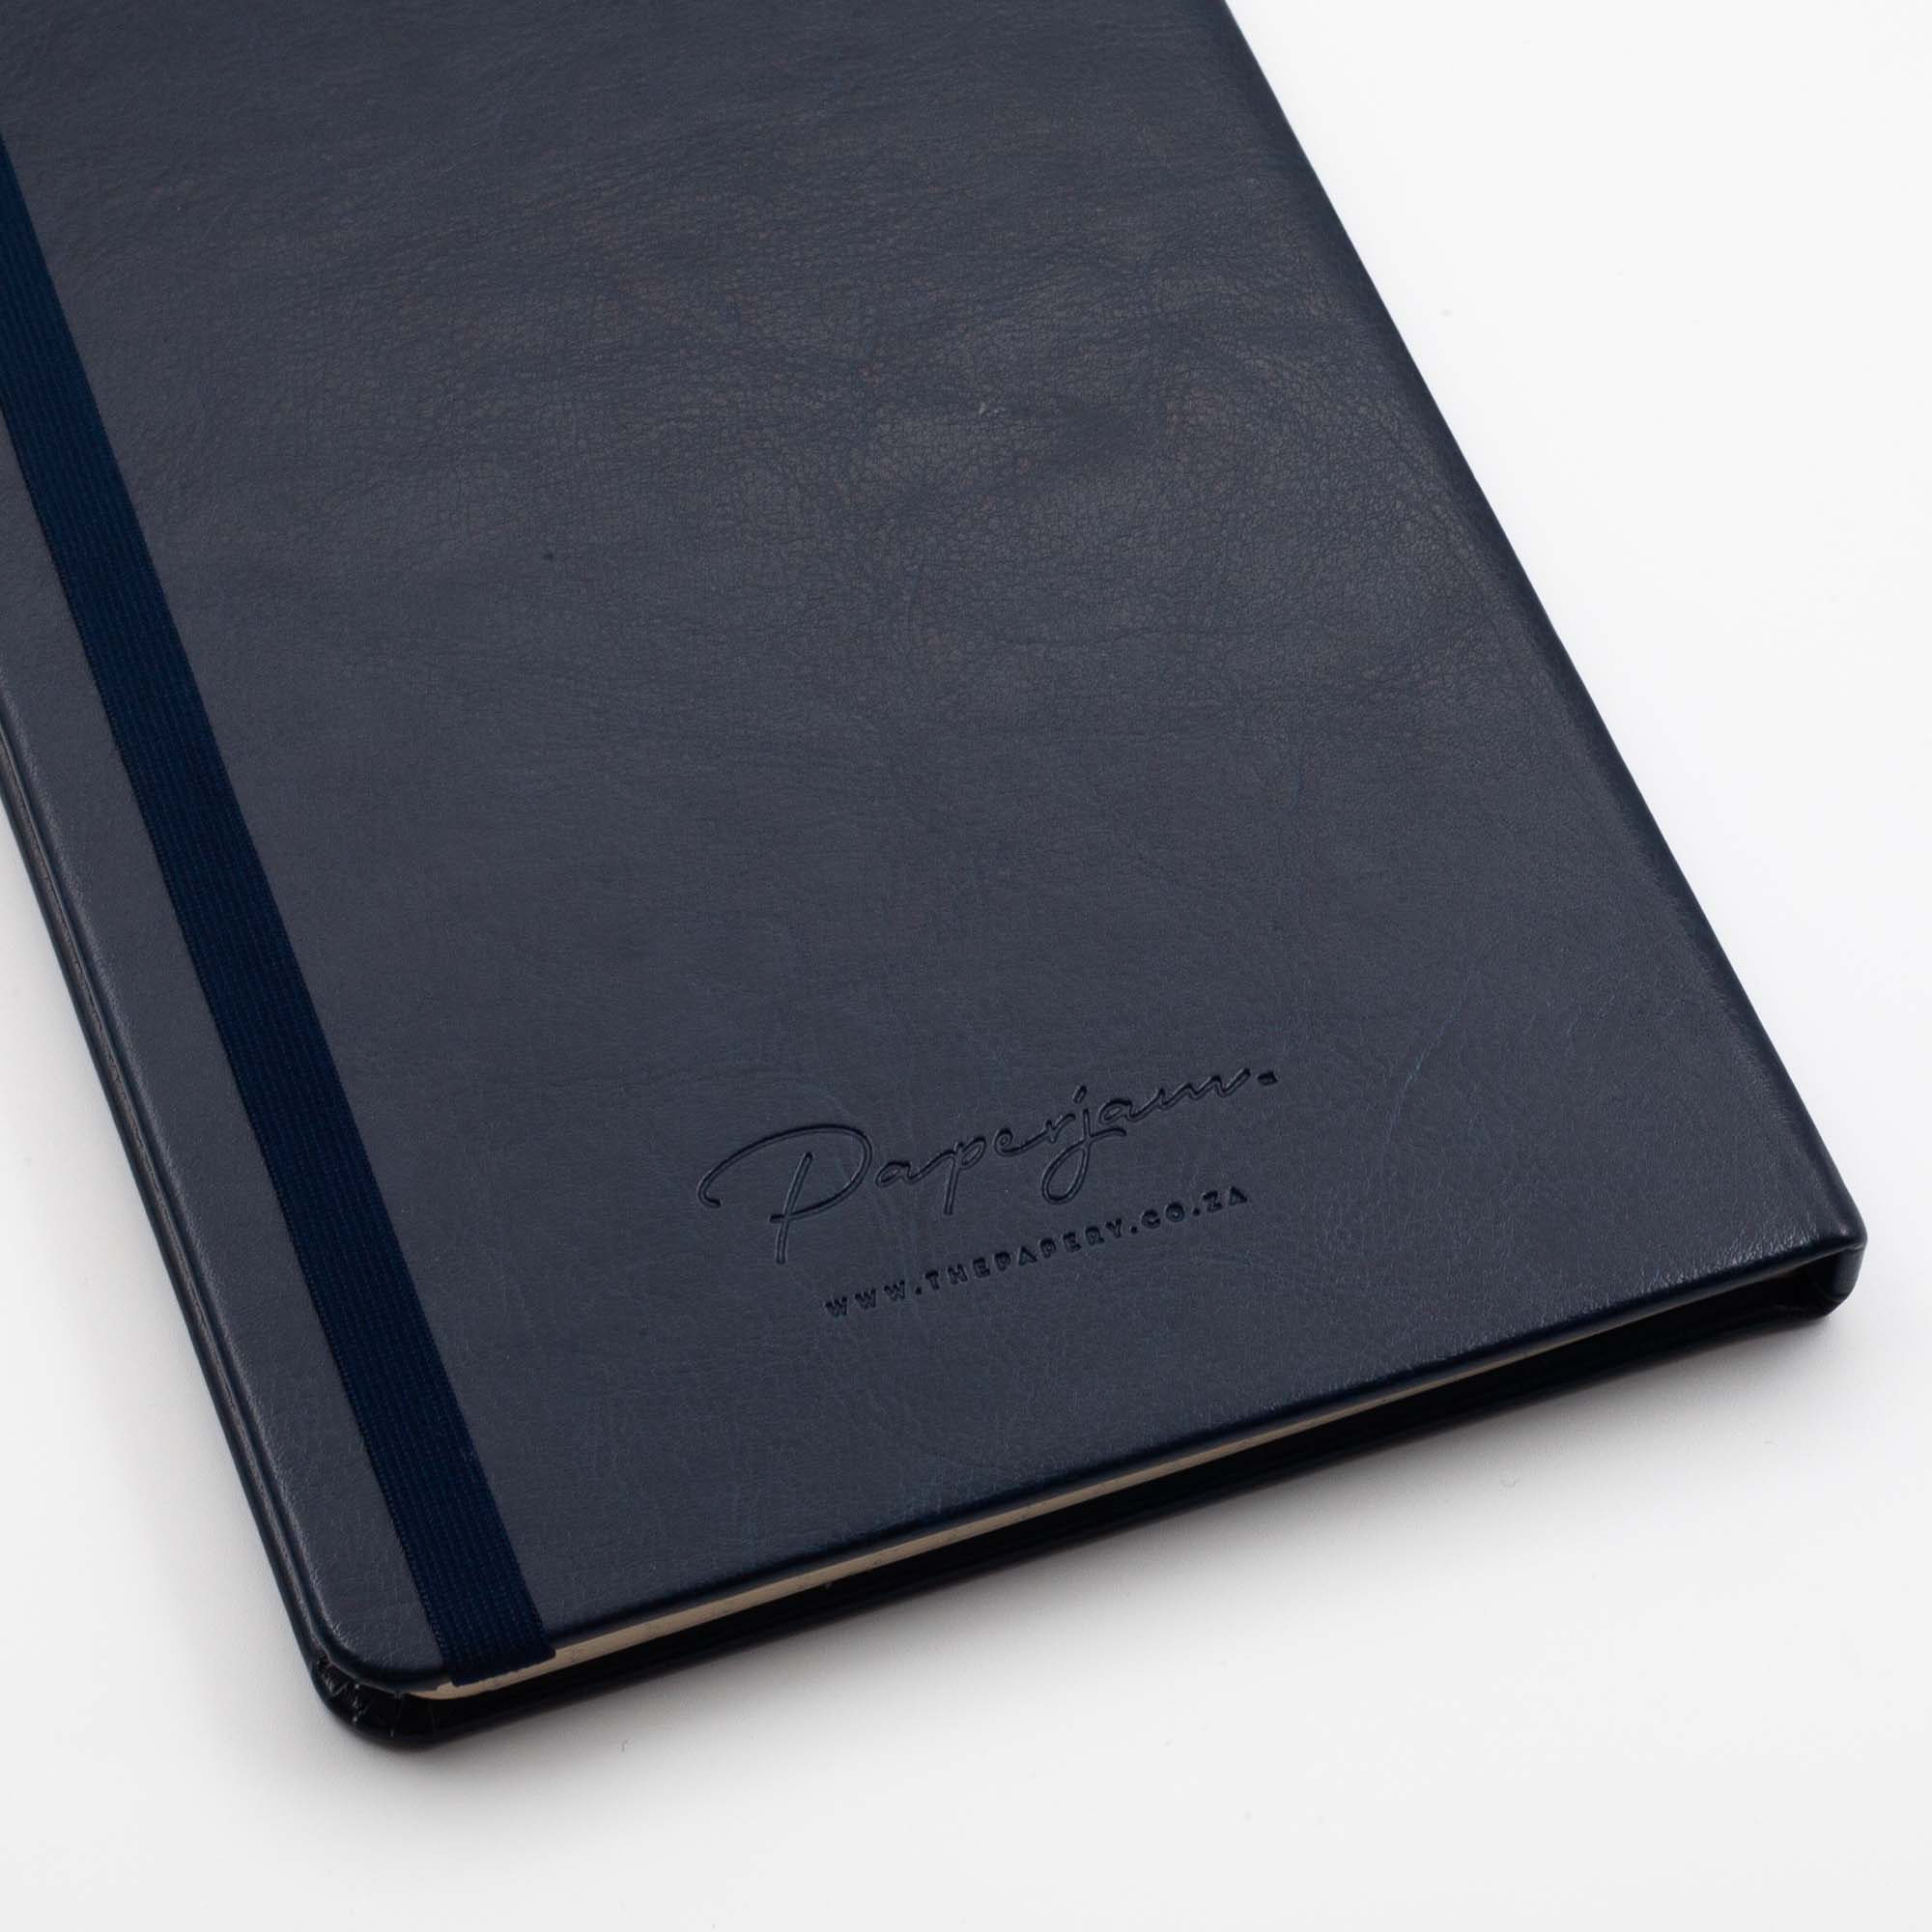 Image shows the back cover of a Navy blue Classic hardcover journal